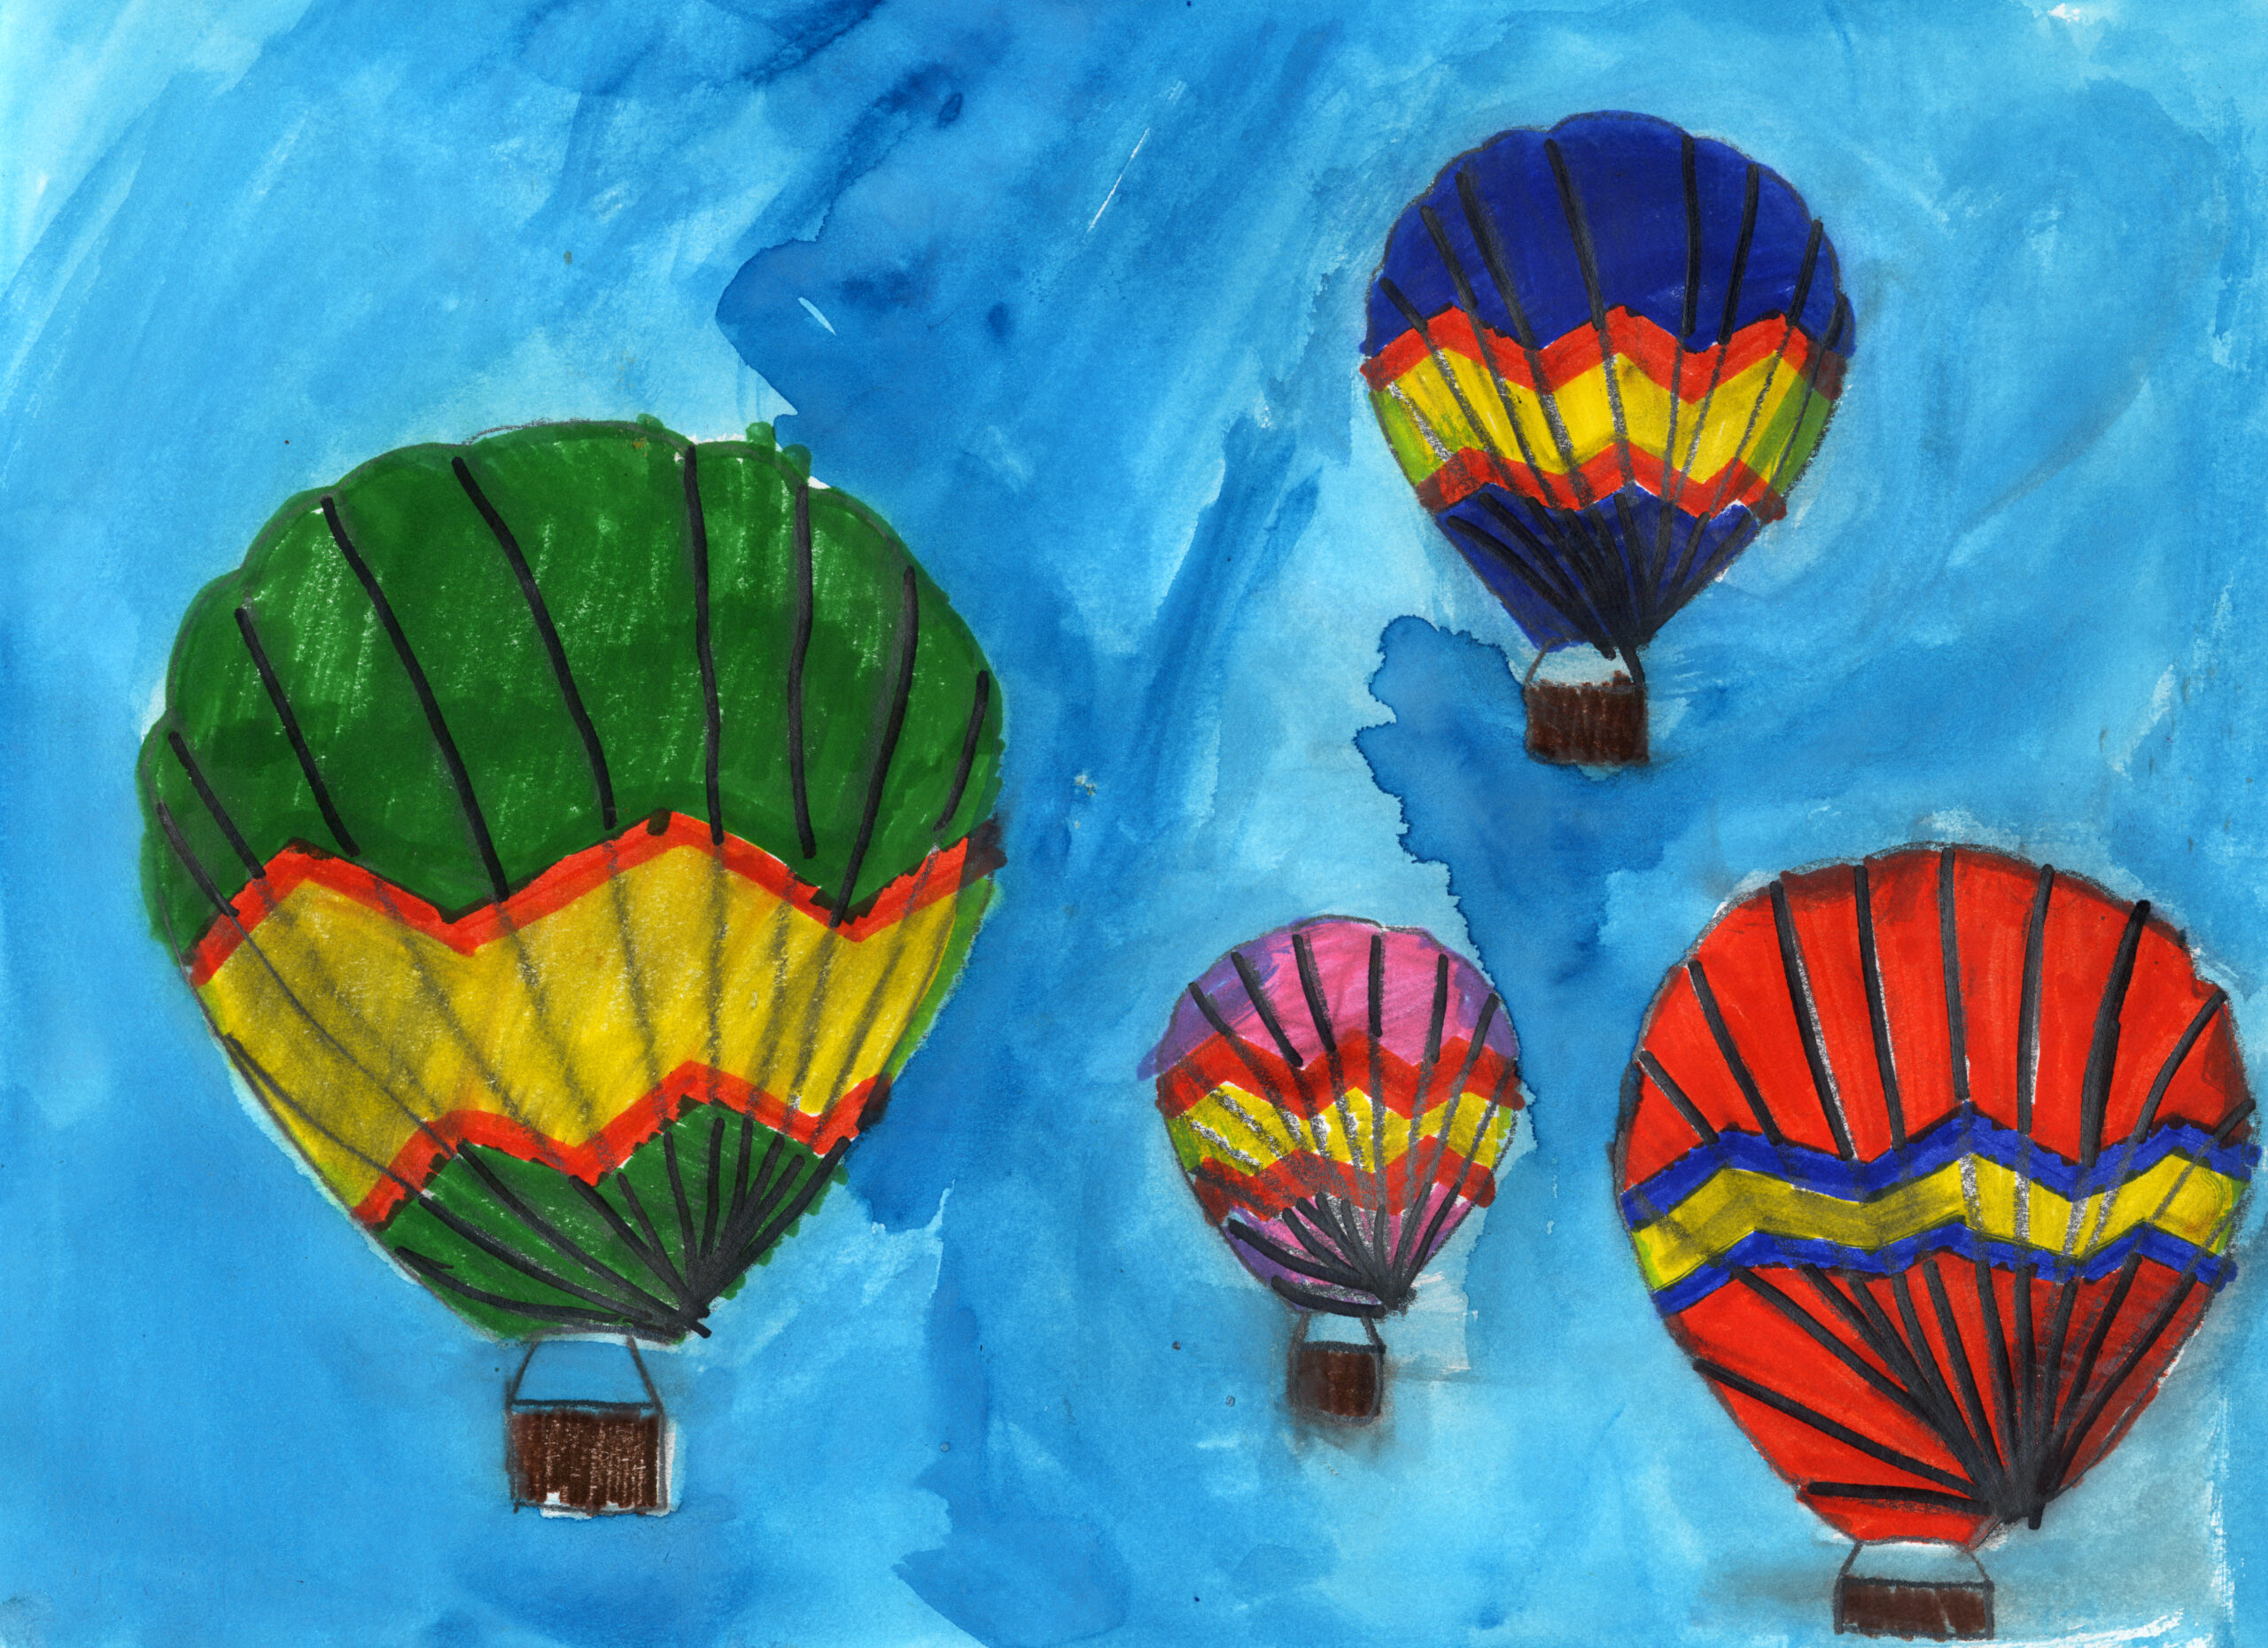 Painting of hot air balloons in the sky